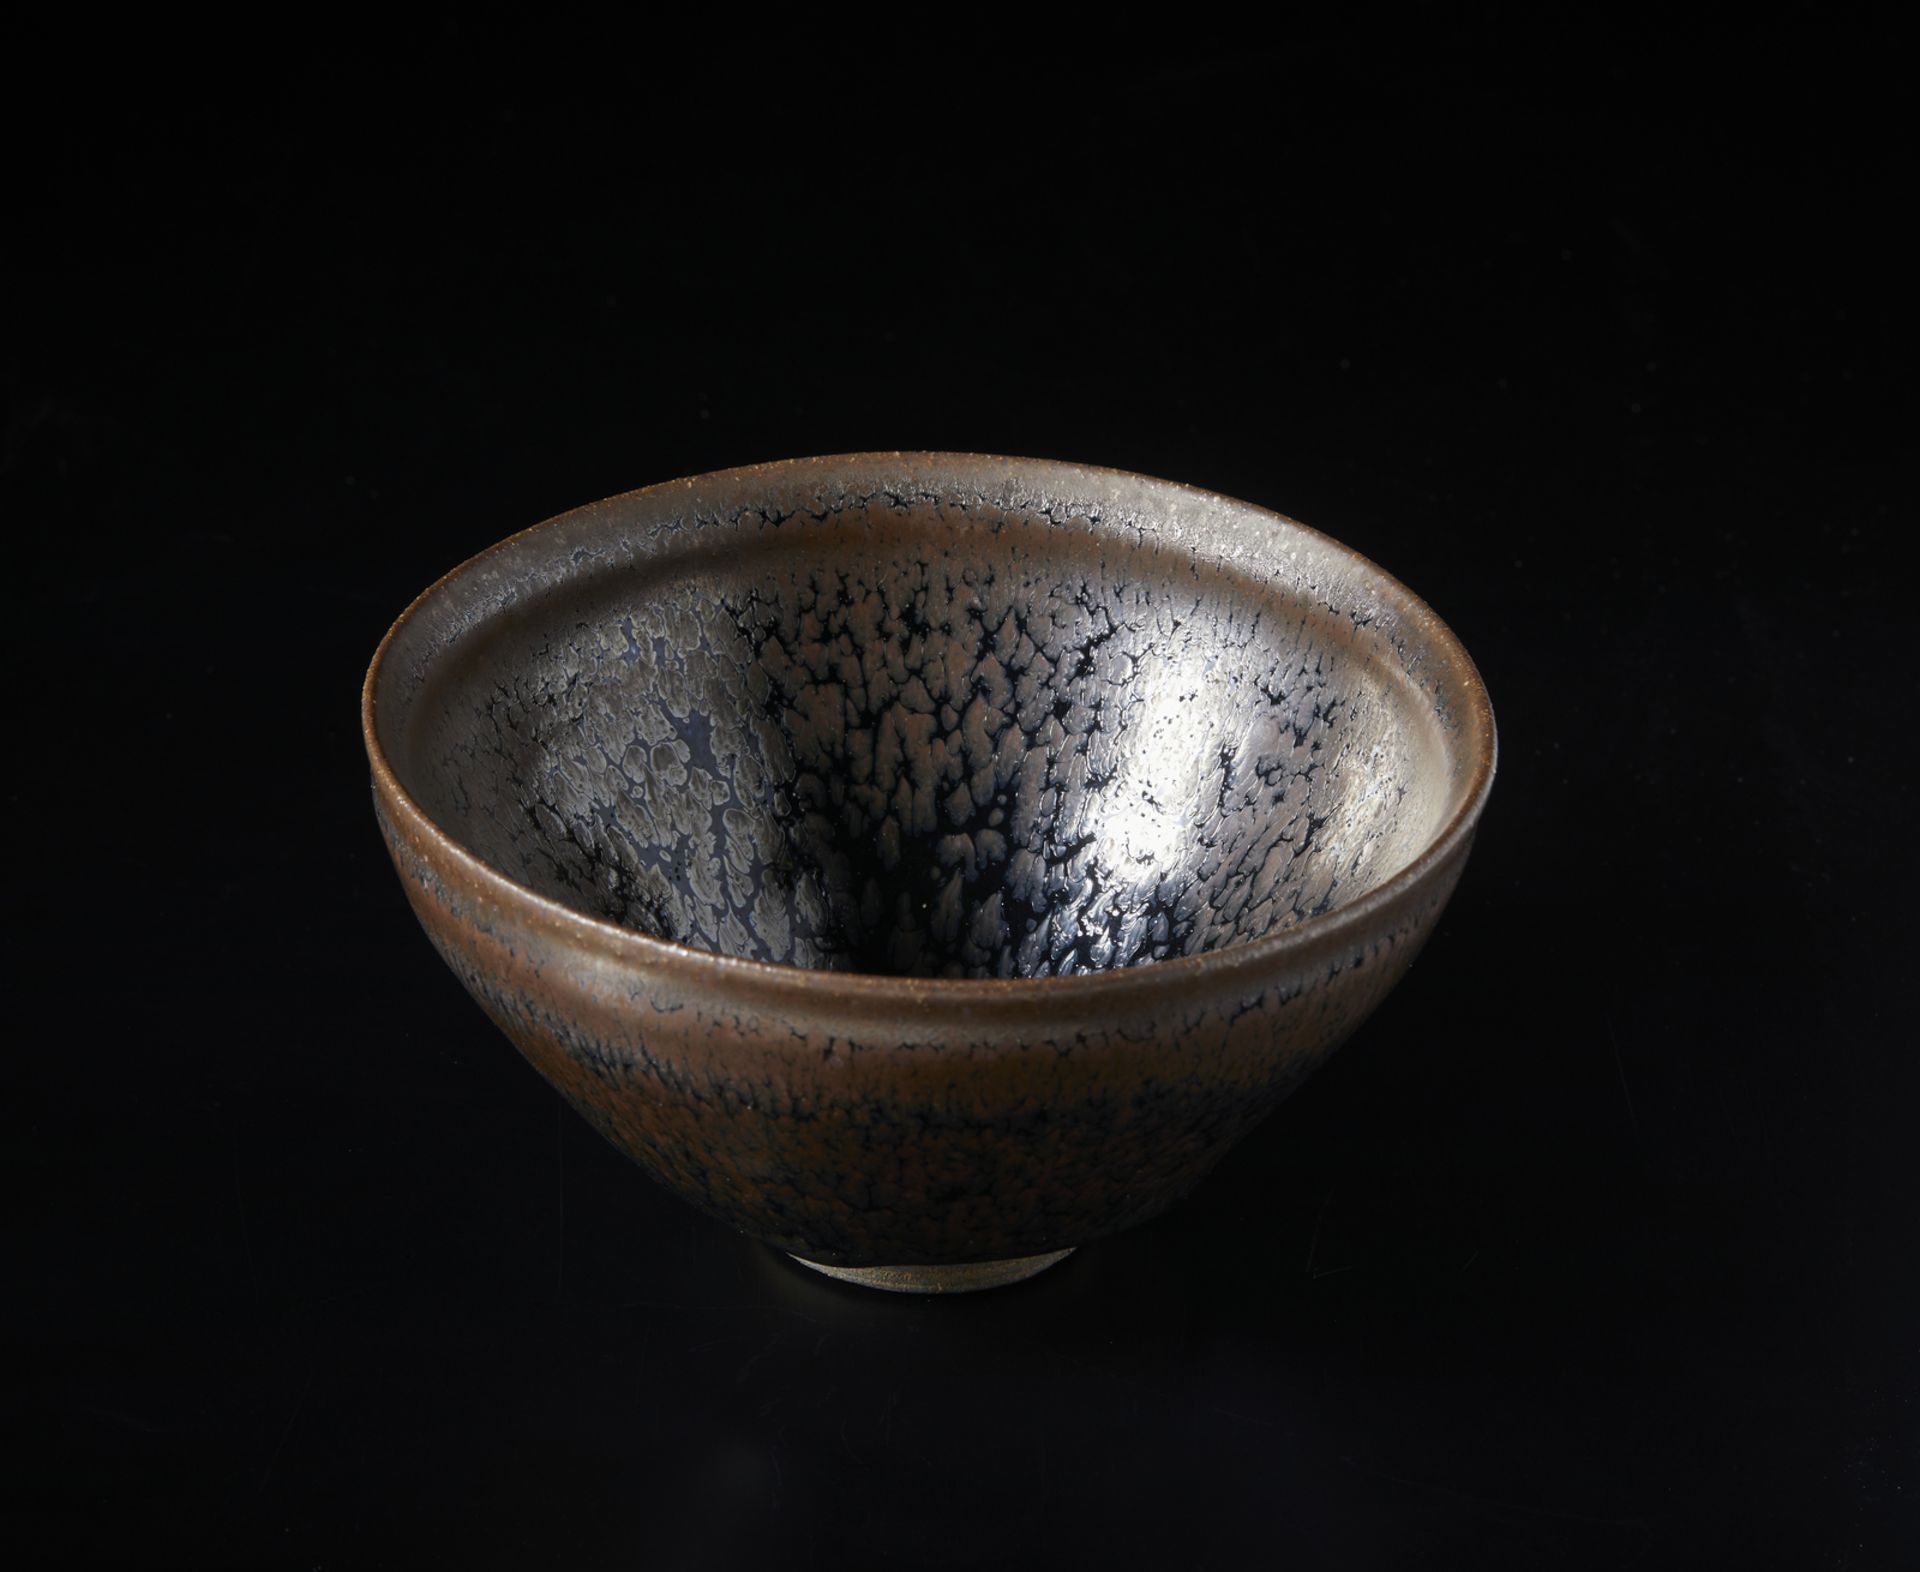 Arte Cinese A jianyao oil spotted pottery bowlChina, Song dynasty, 12th century . - Image 2 of 4